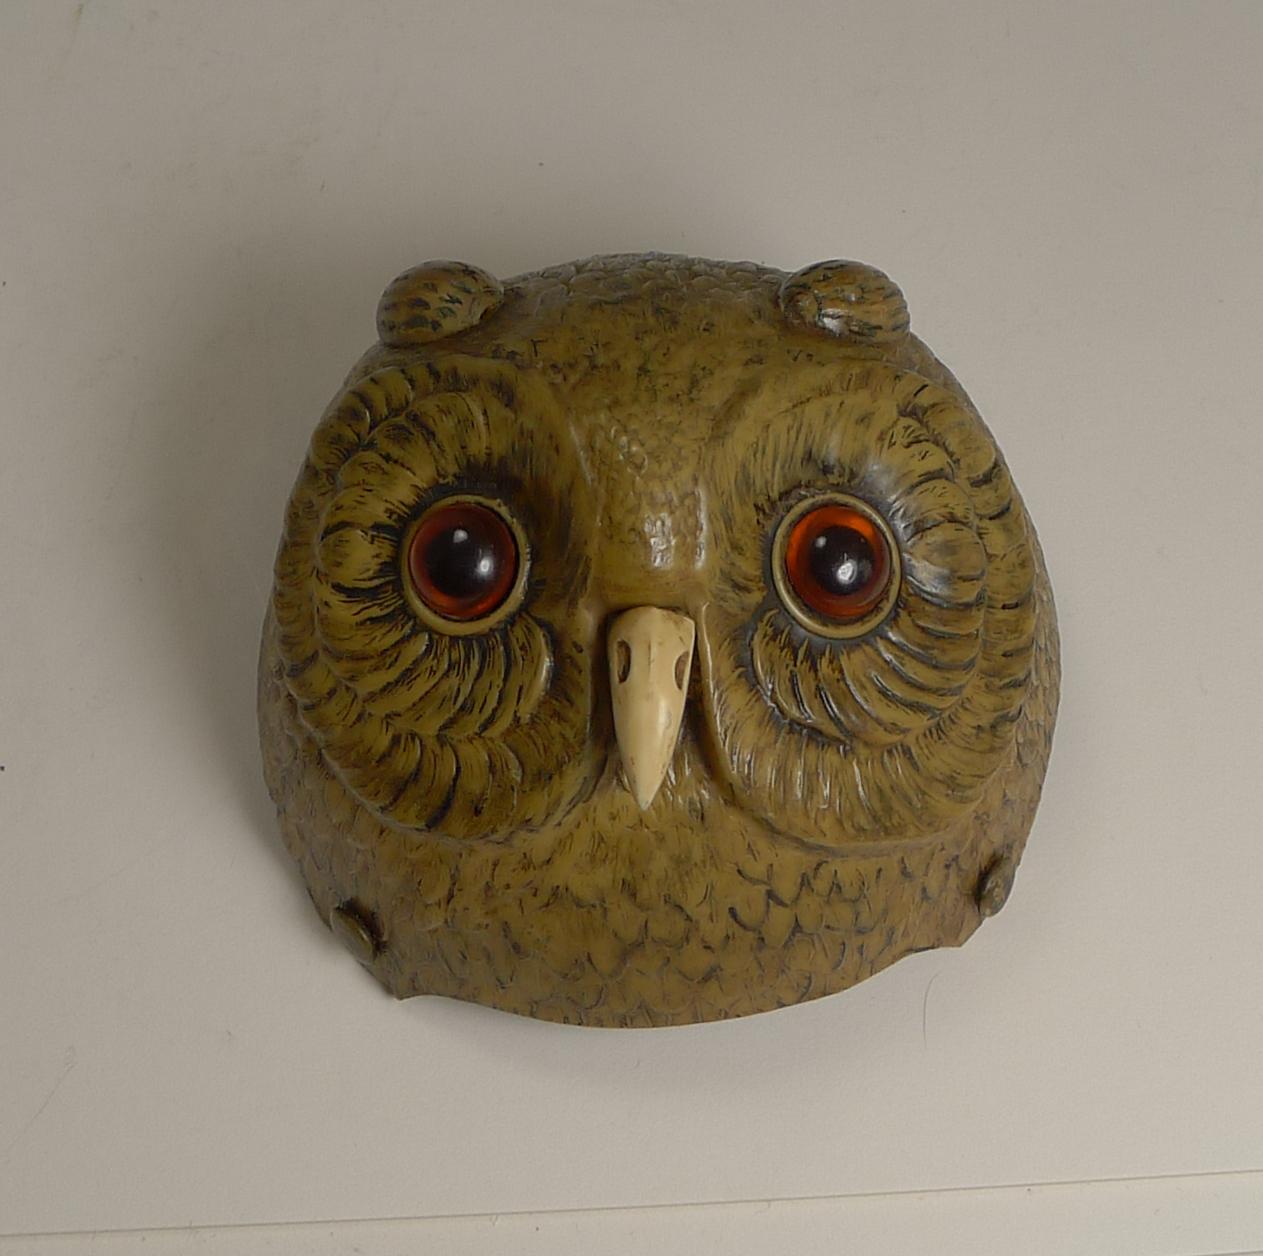 Rare Novelty / Figural Mechanical Bell in Early Celluloid, circa 1900, Owl 1